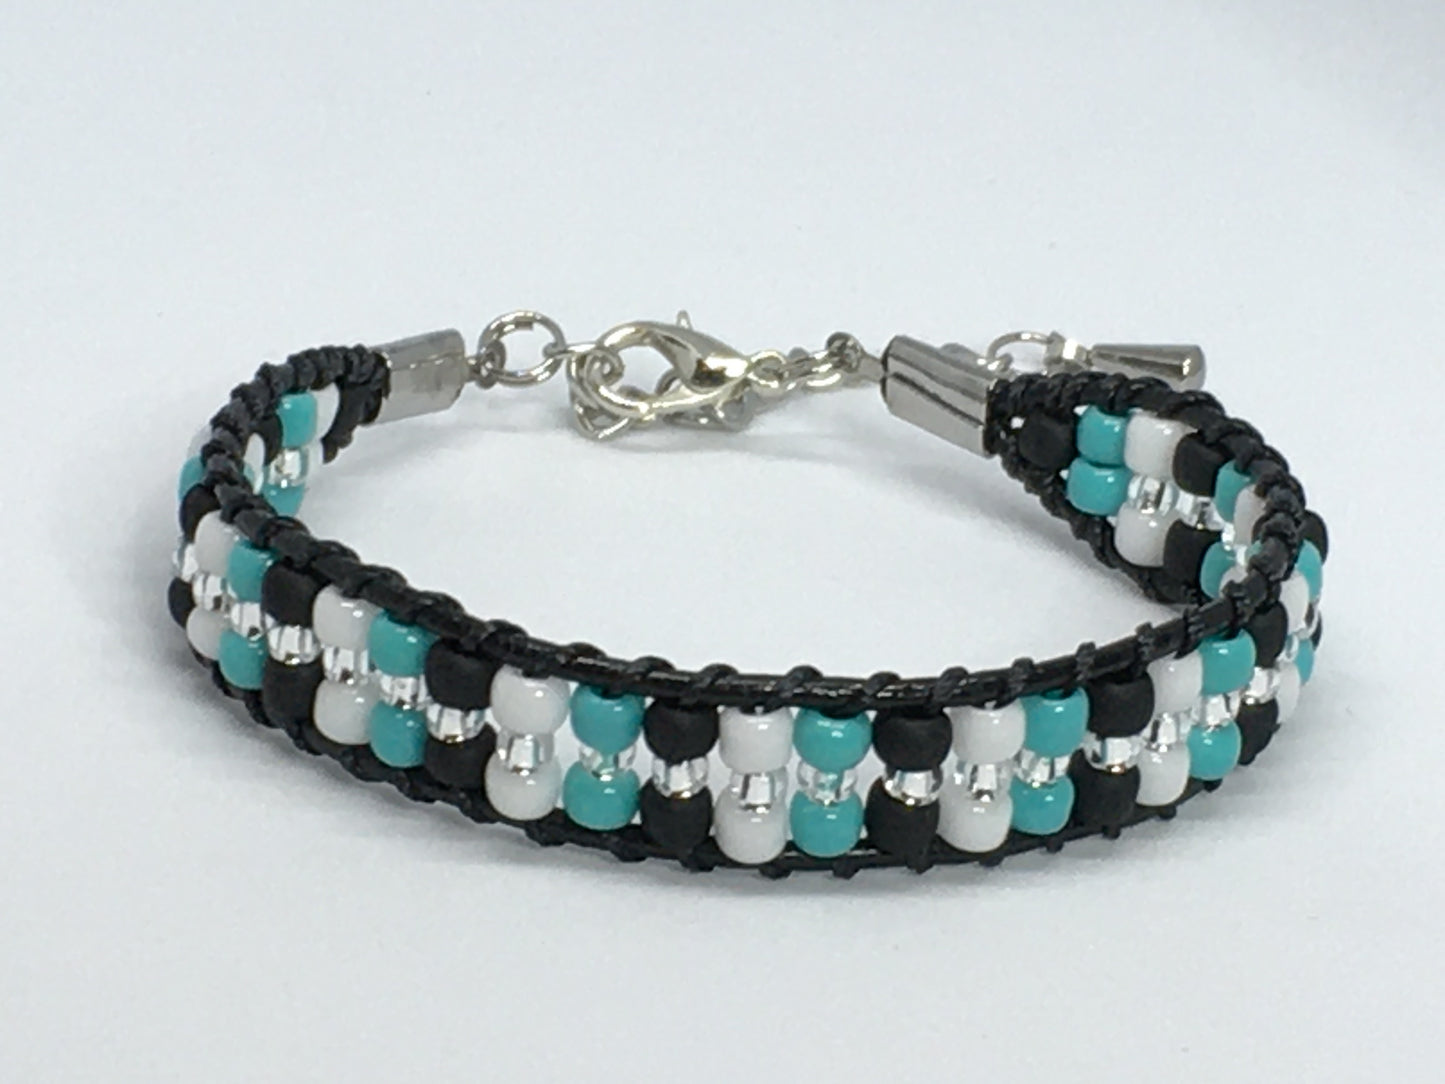 6.75" Bead and Leather Women's Bracelet